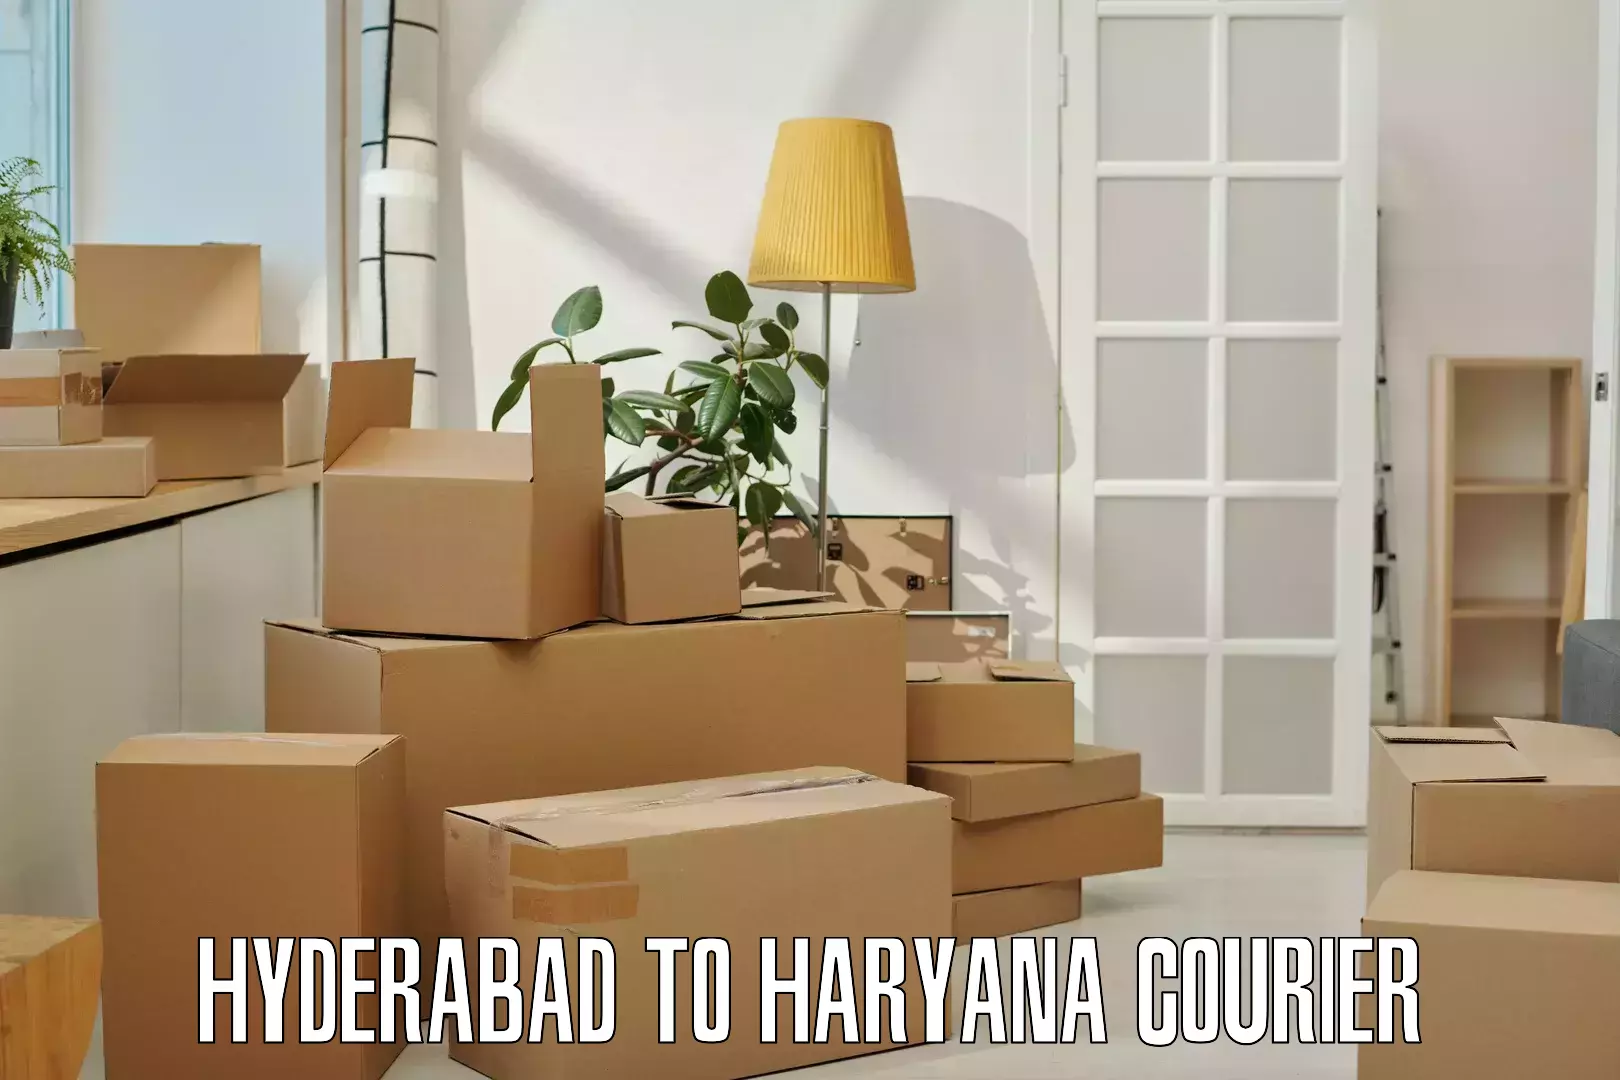 24-hour delivery options Hyderabad to NCR Haryana